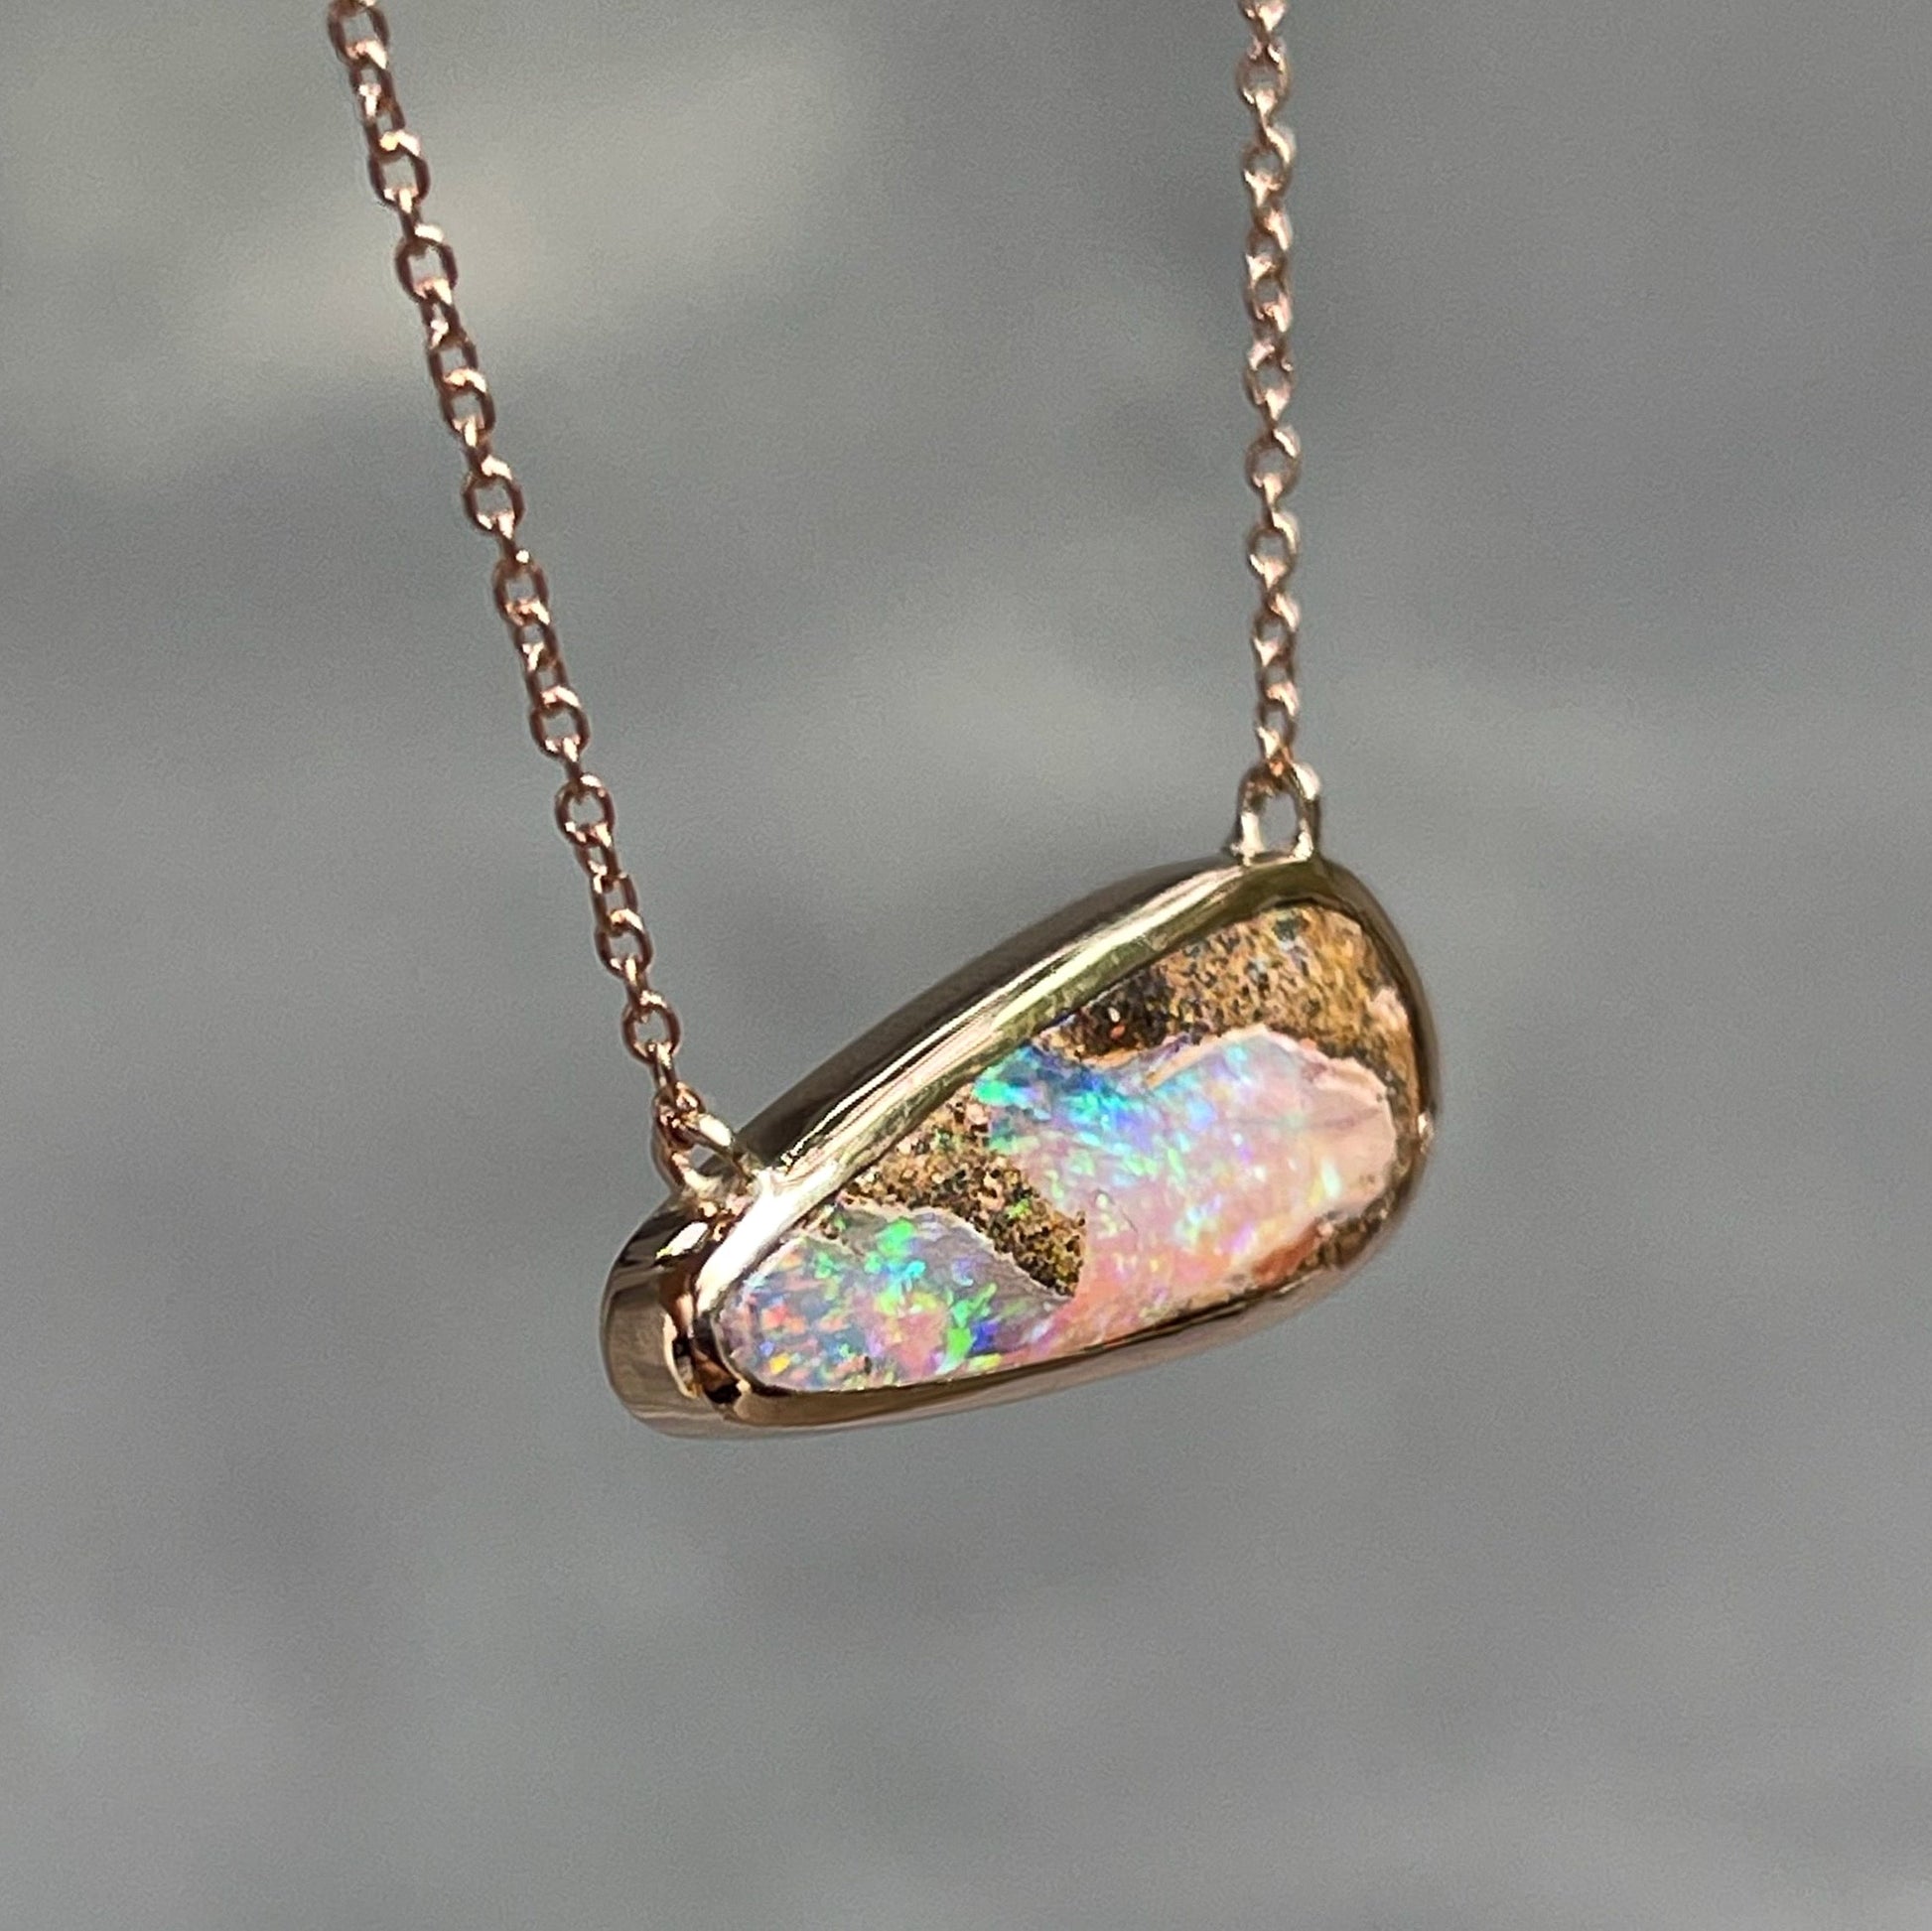 An angled shot of Australian Opal Necklace by NIXIN Jewelry showing the top of the bezel setting. The opal pendant in made in rose gold.